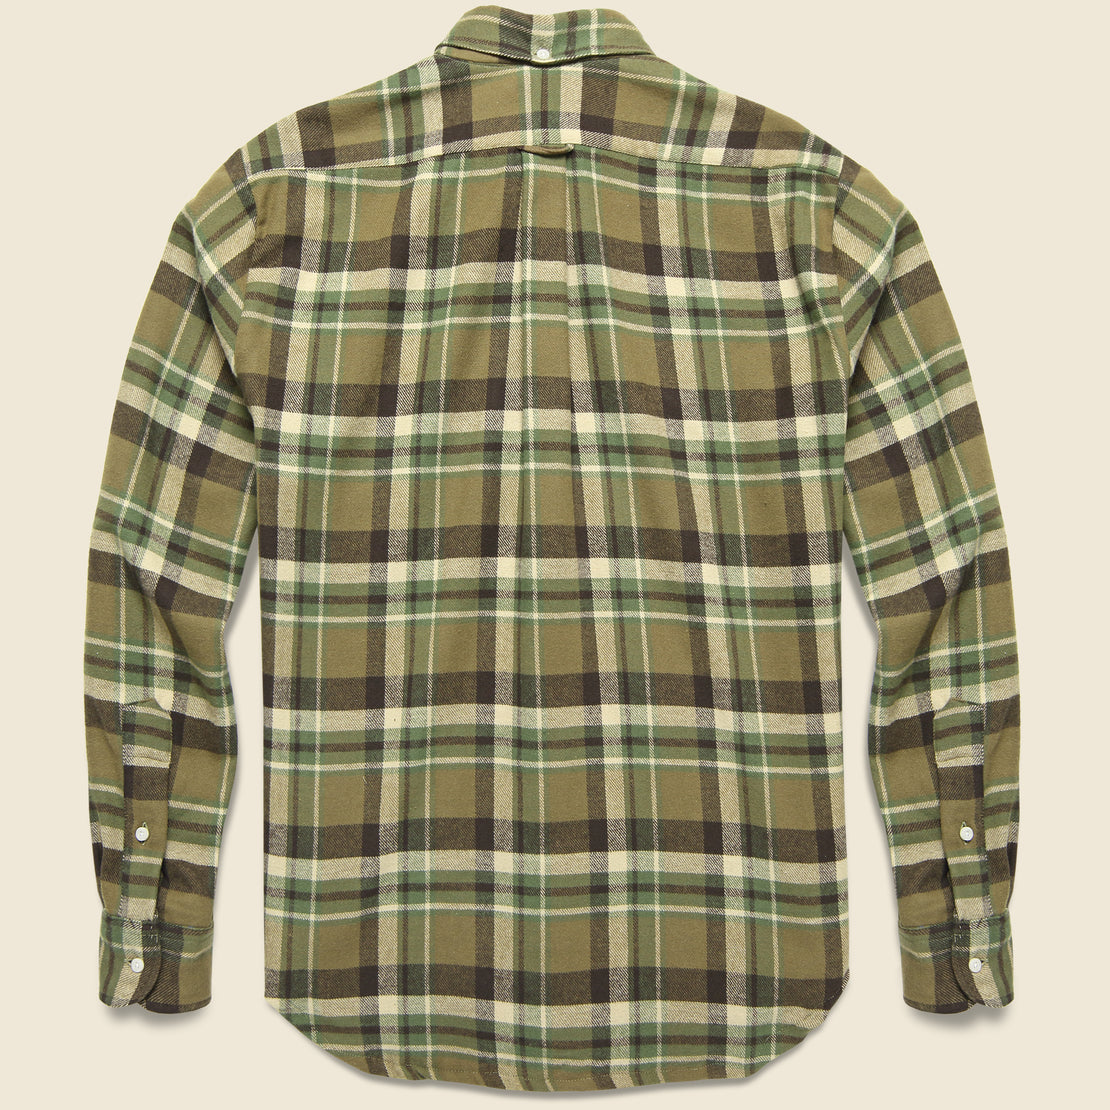 Country Plaid Shirt - Olive - Gitman Vintage - STAG Provisions - Tops - L/S Woven - Plaid